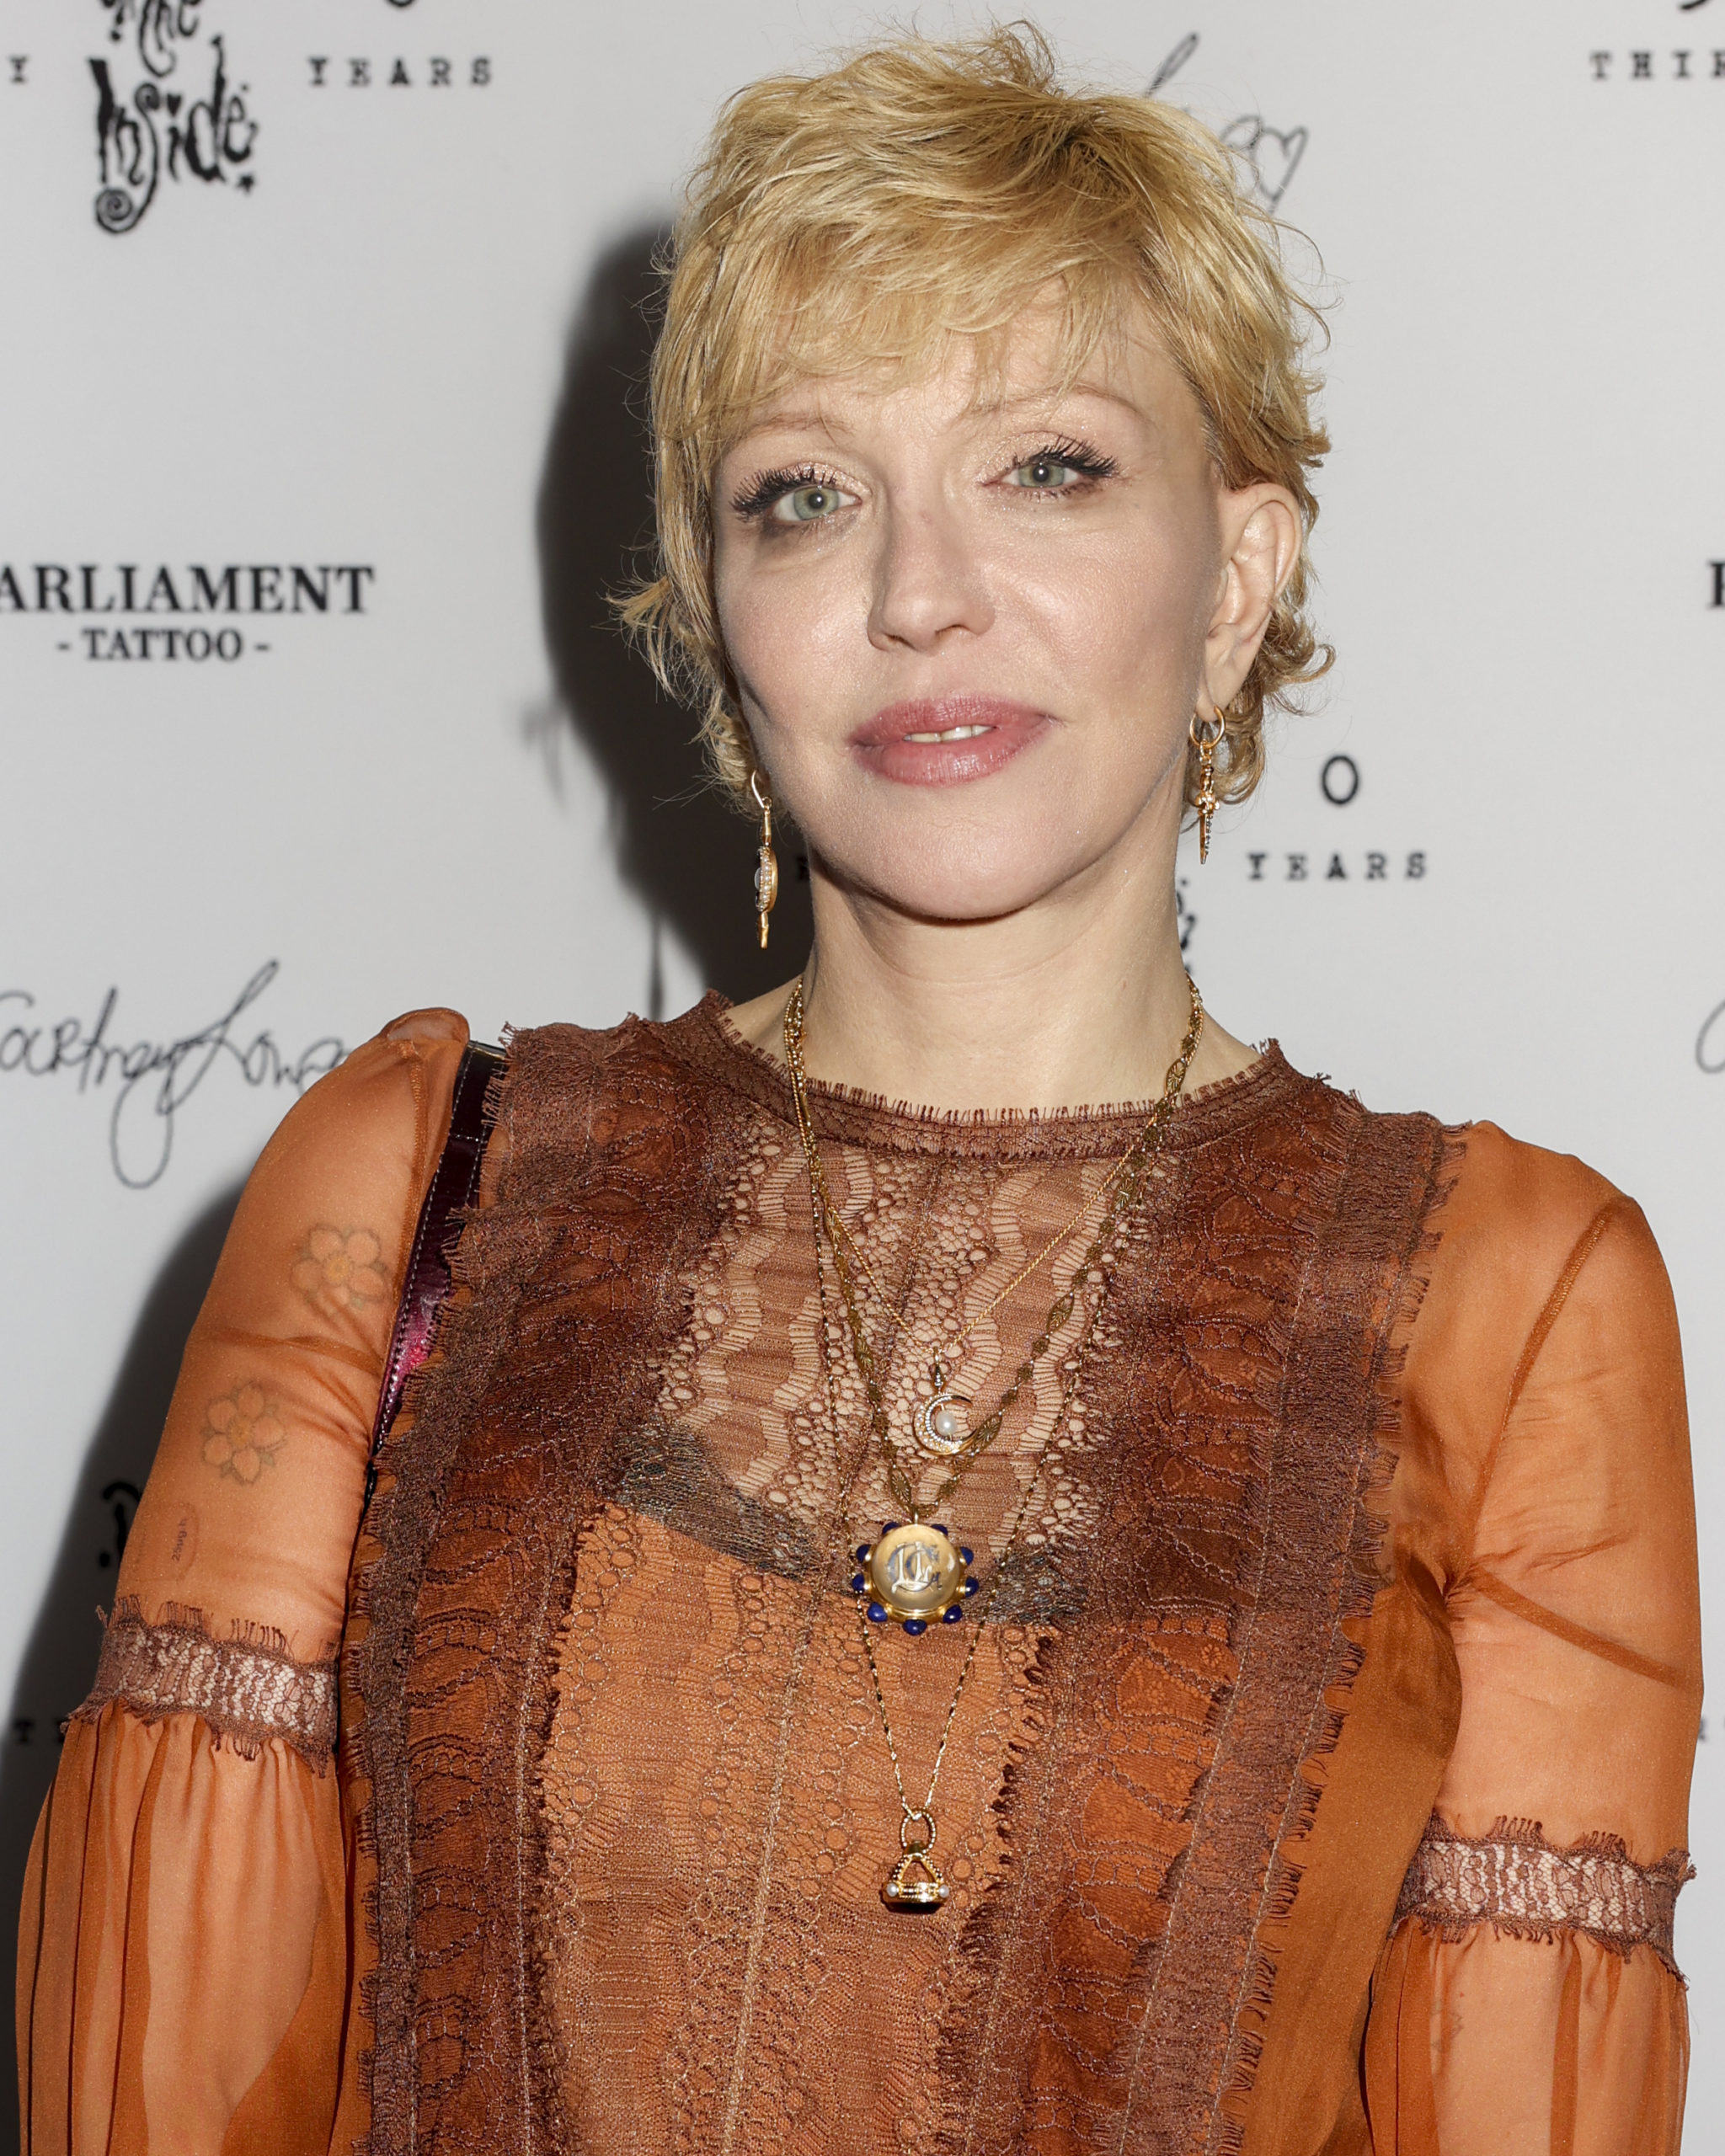 #’I Was Wrong’: Courtney Love Evolves Her Stance On Talking About Johnny Depp & Amber Heard: ‘I Don’t Want To Bully’